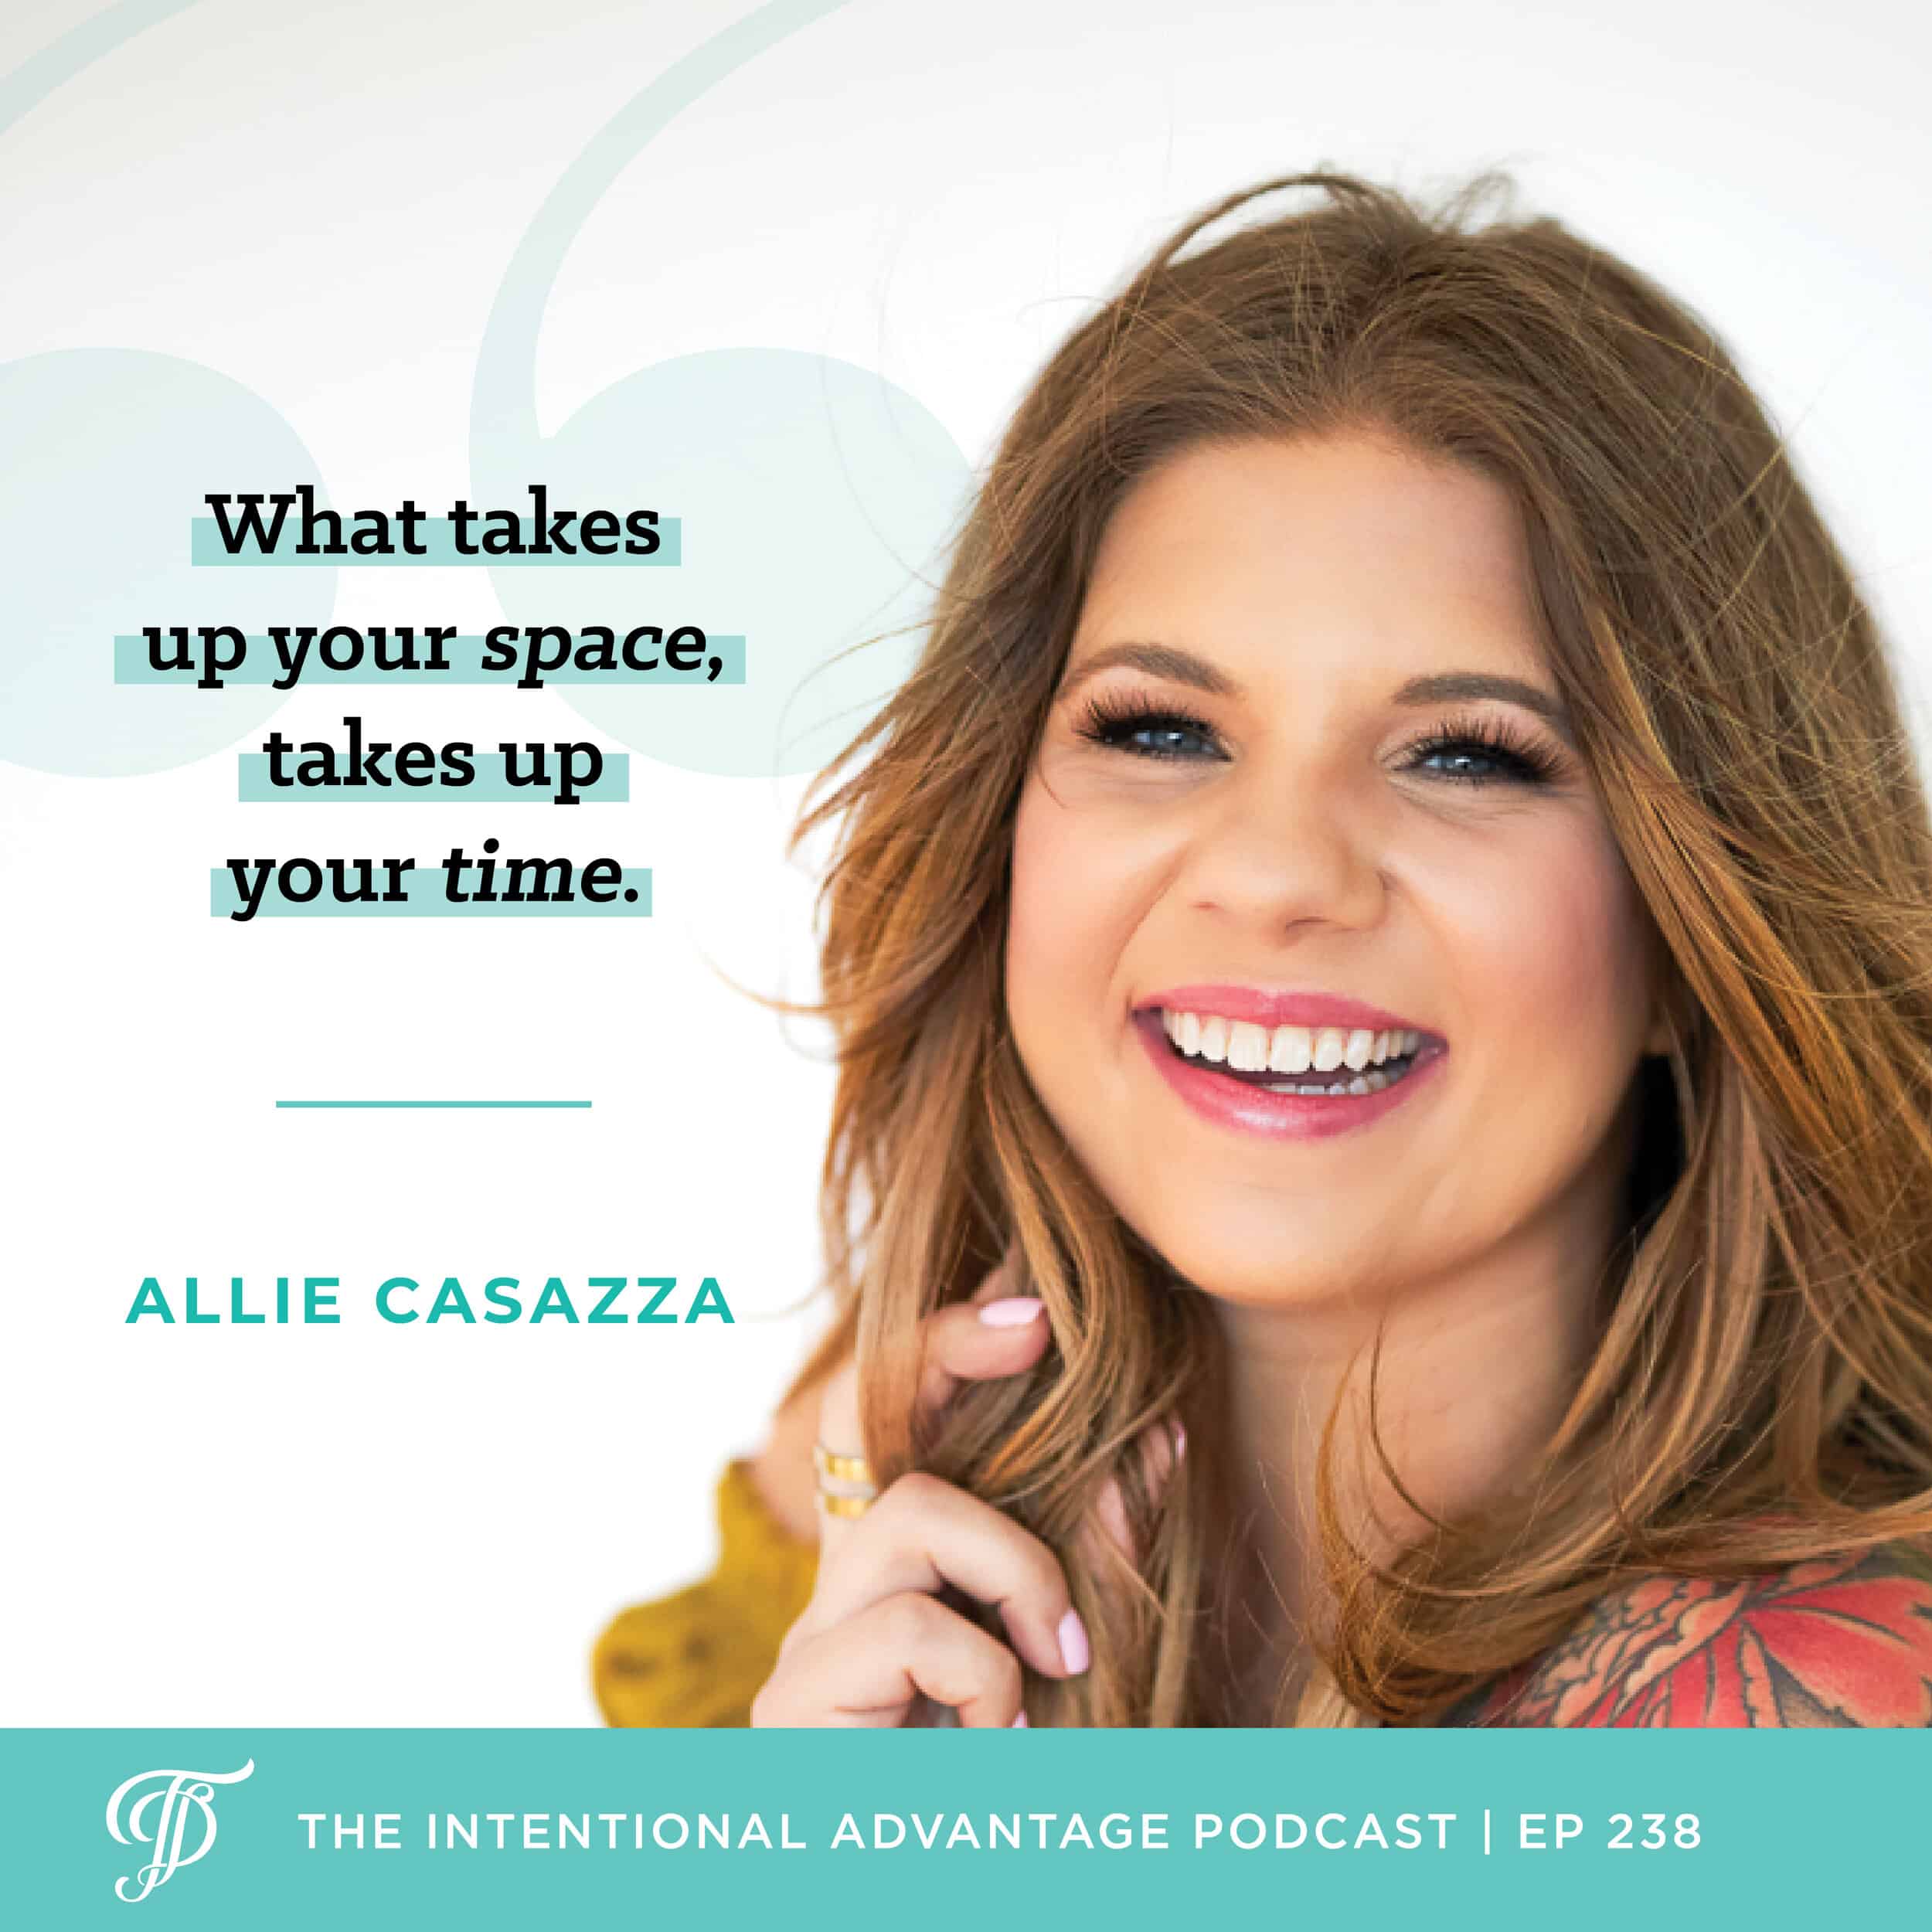 Allie Casazza quote from her podcast interview on The Intentional Advantage